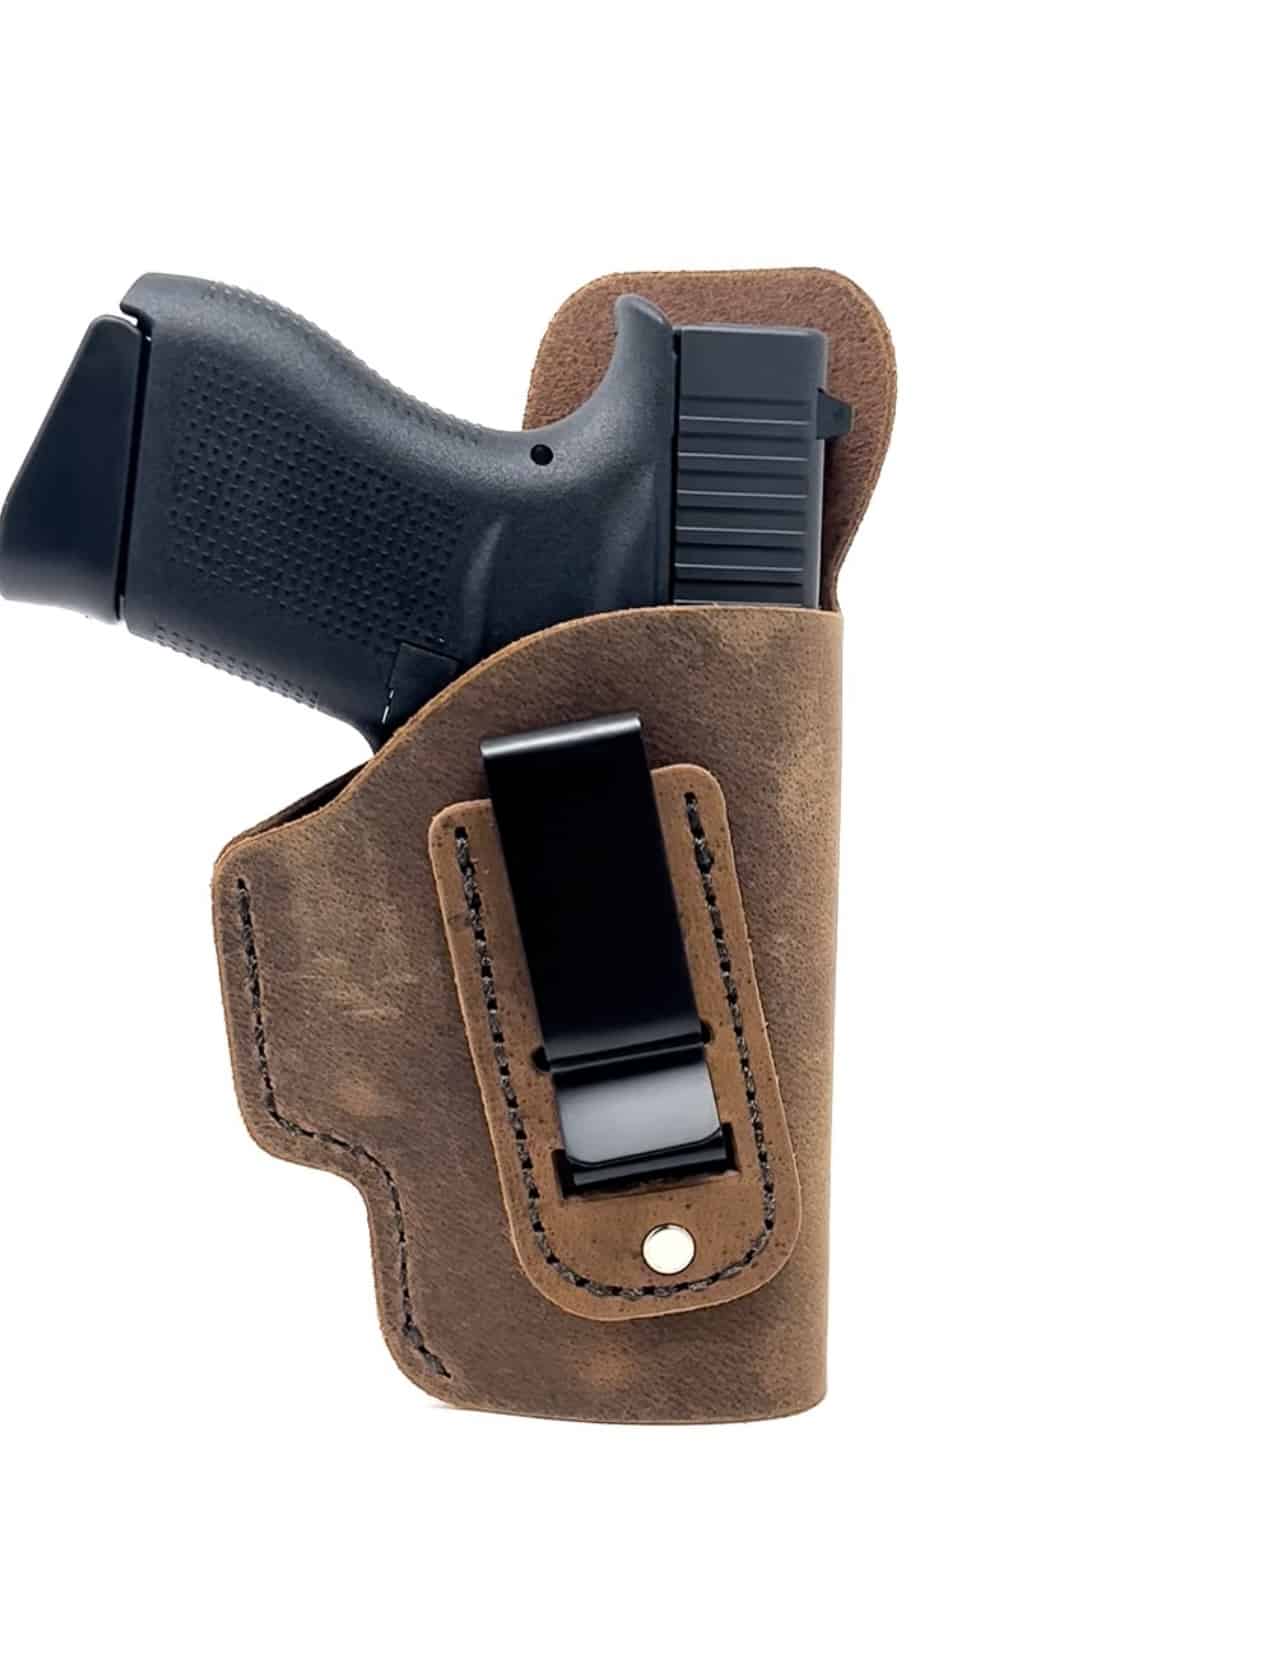 Ruger LCP II Leather RH IWB holster by Steel Hide leather Co. 